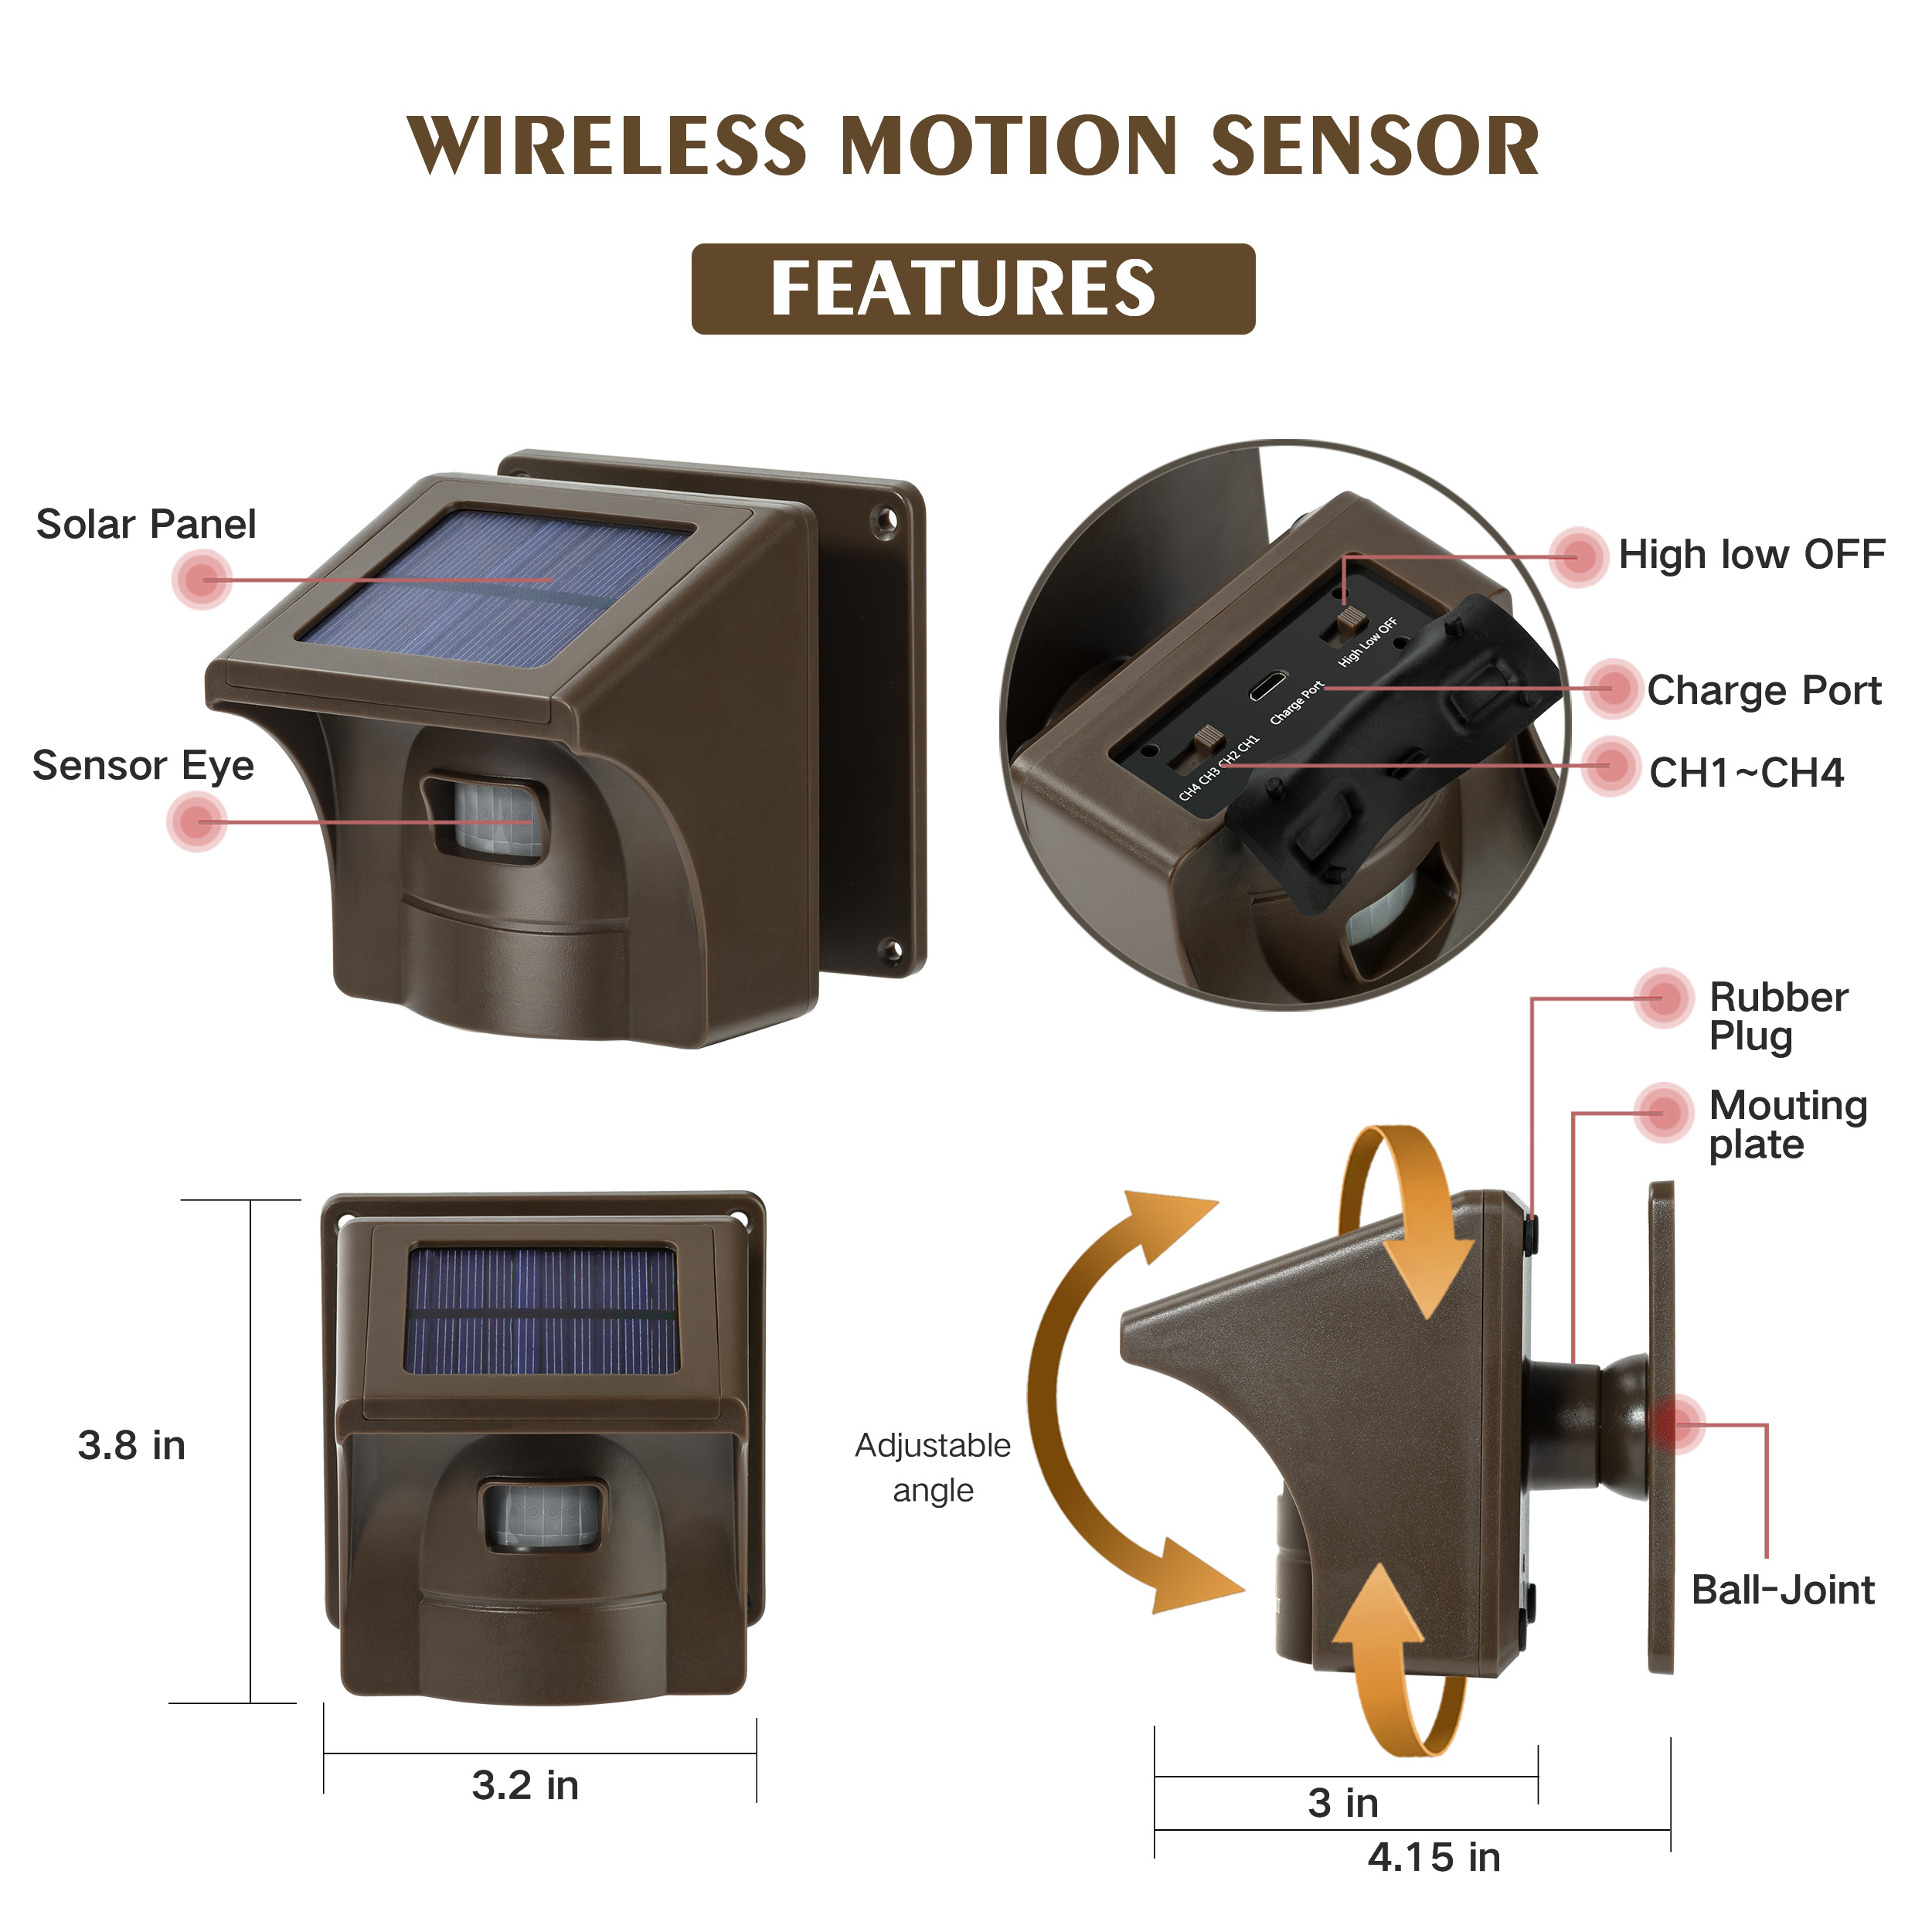 Outdoor Unit-Brown Wireless Driveway Alarm 1/3 Mile Long Range Motion Sensor Alert System Driveway Detector for Home with 2000mAh Rechargeable Battry